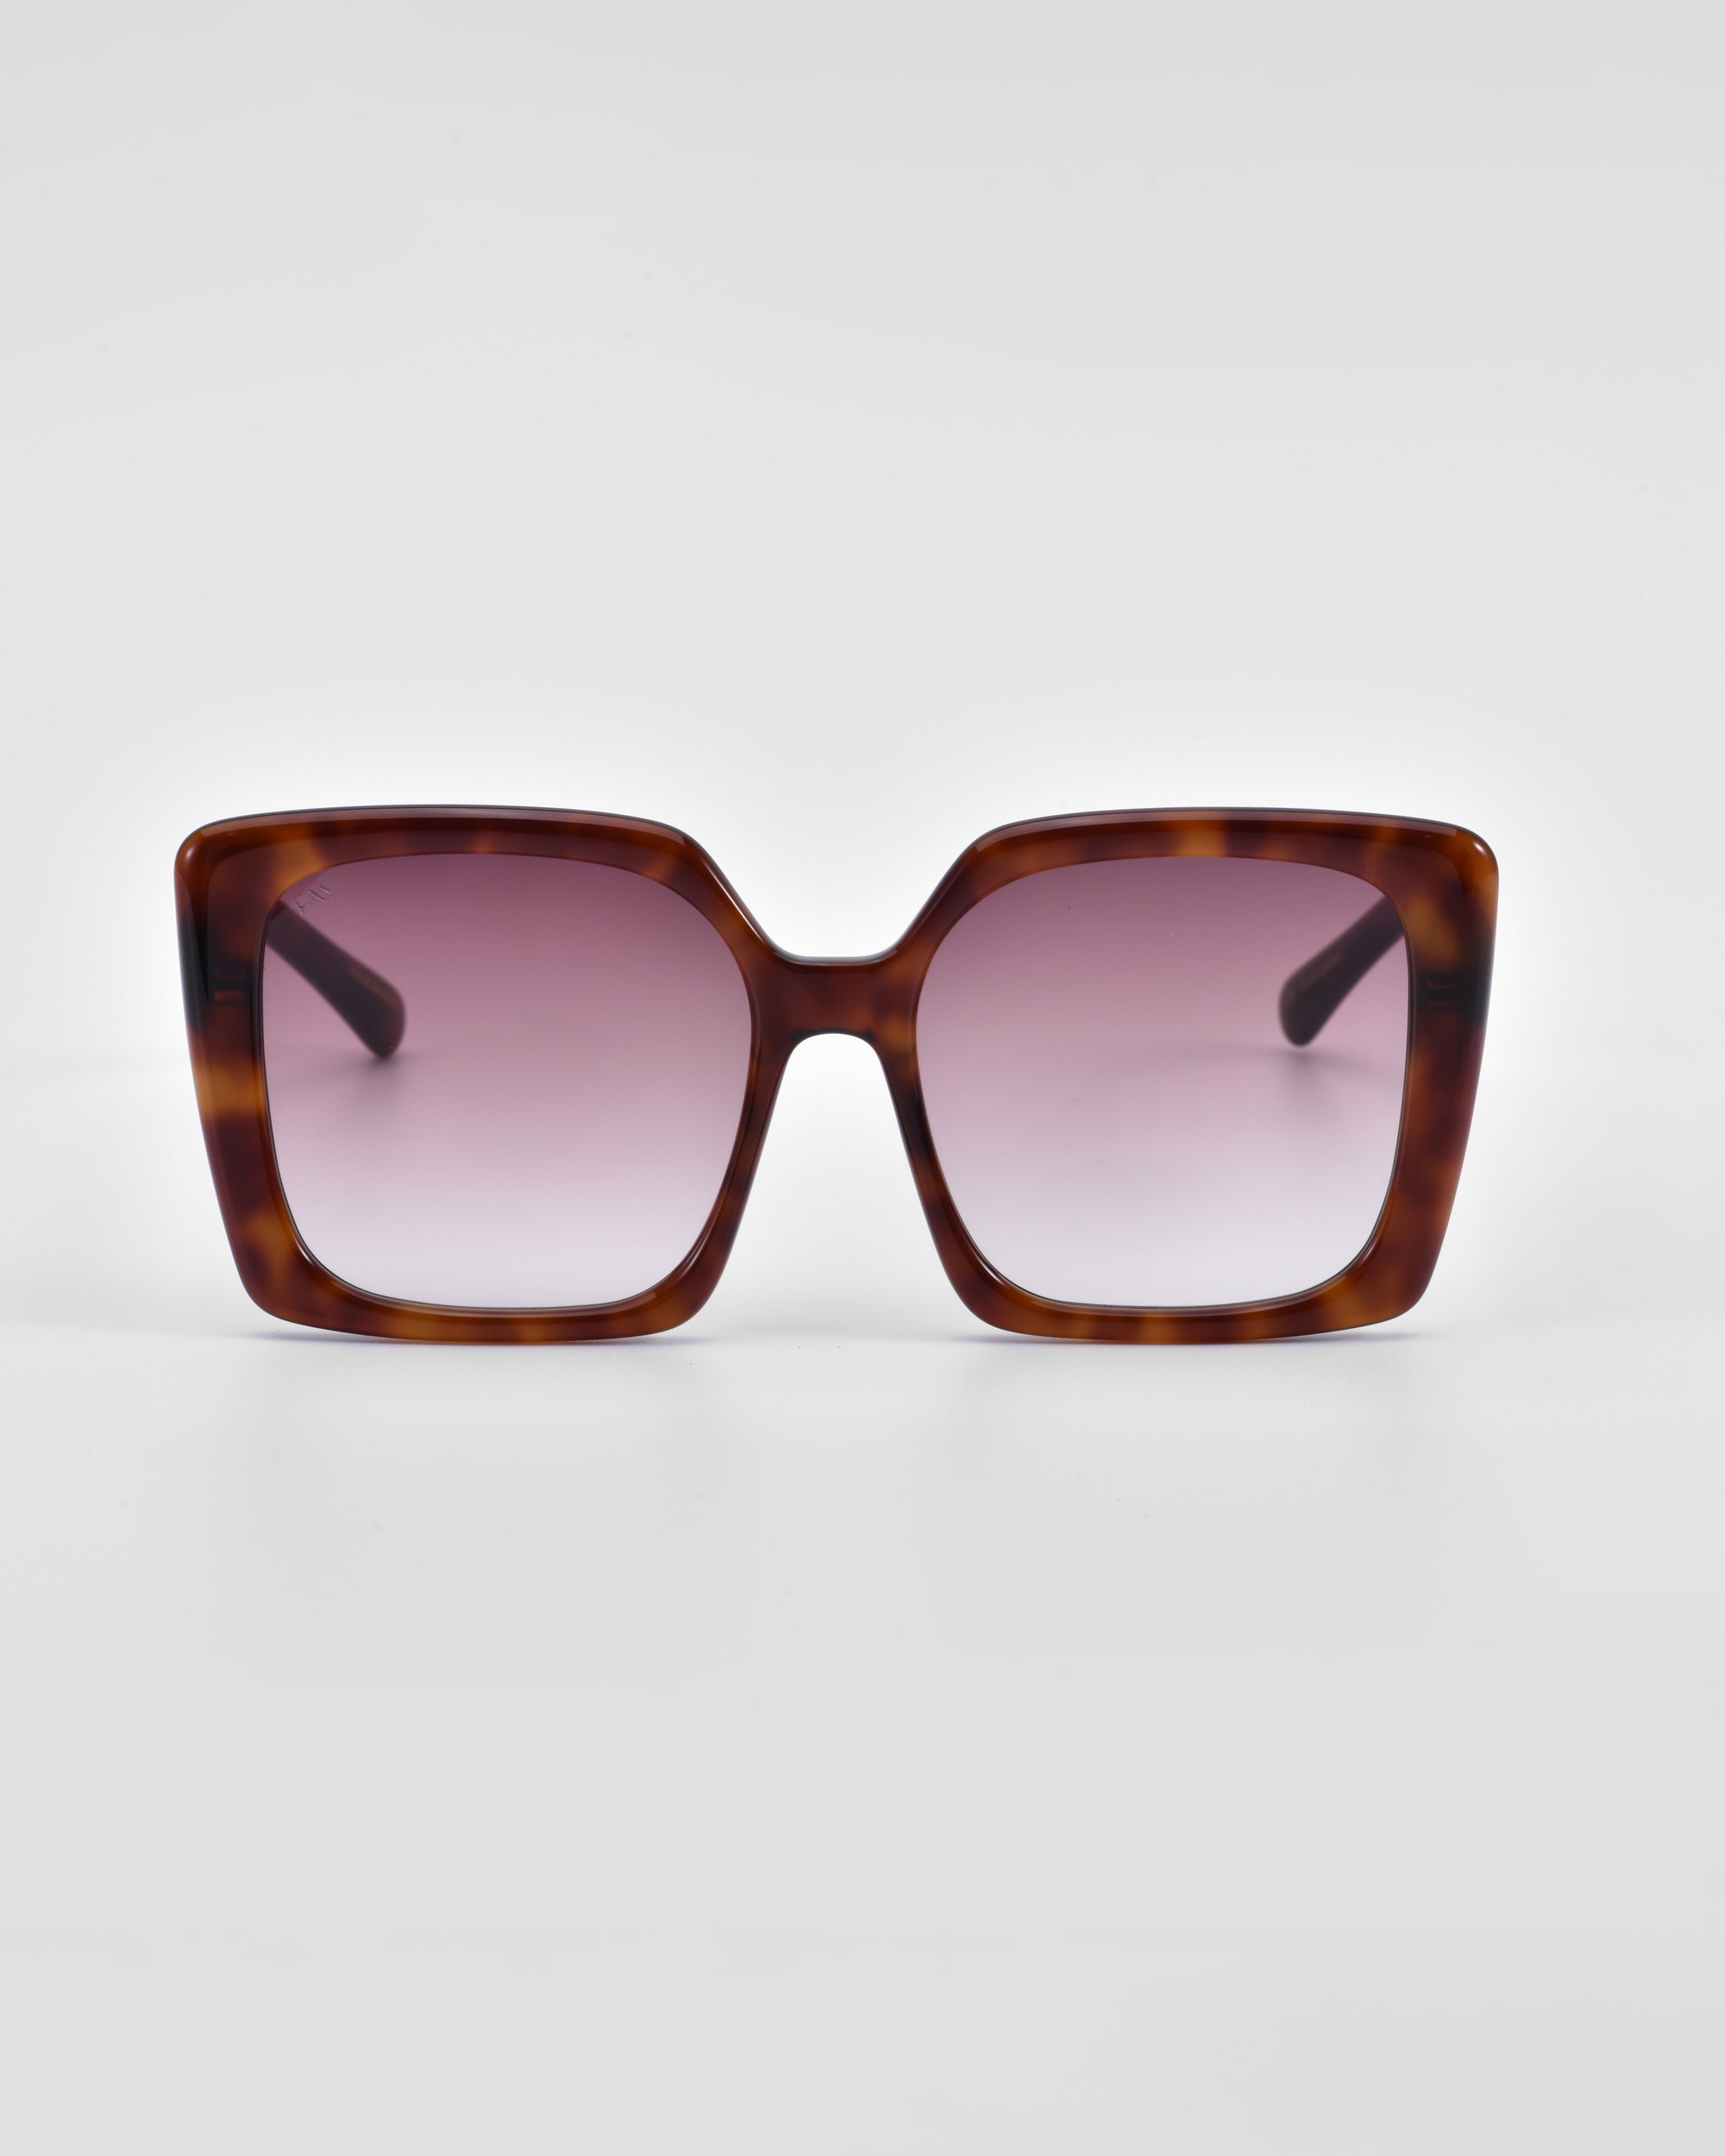 A pair of large, square-framed For Art&#39;s Sake® Eos sunglasses with a tortoiseshell pattern and gradient pink lenses is centered against a plain white background. Featuring an oversized soft-square silhouette, the For Art&#39;s Sake® Eos sunglasses have a modern, stylish design with wide arms.